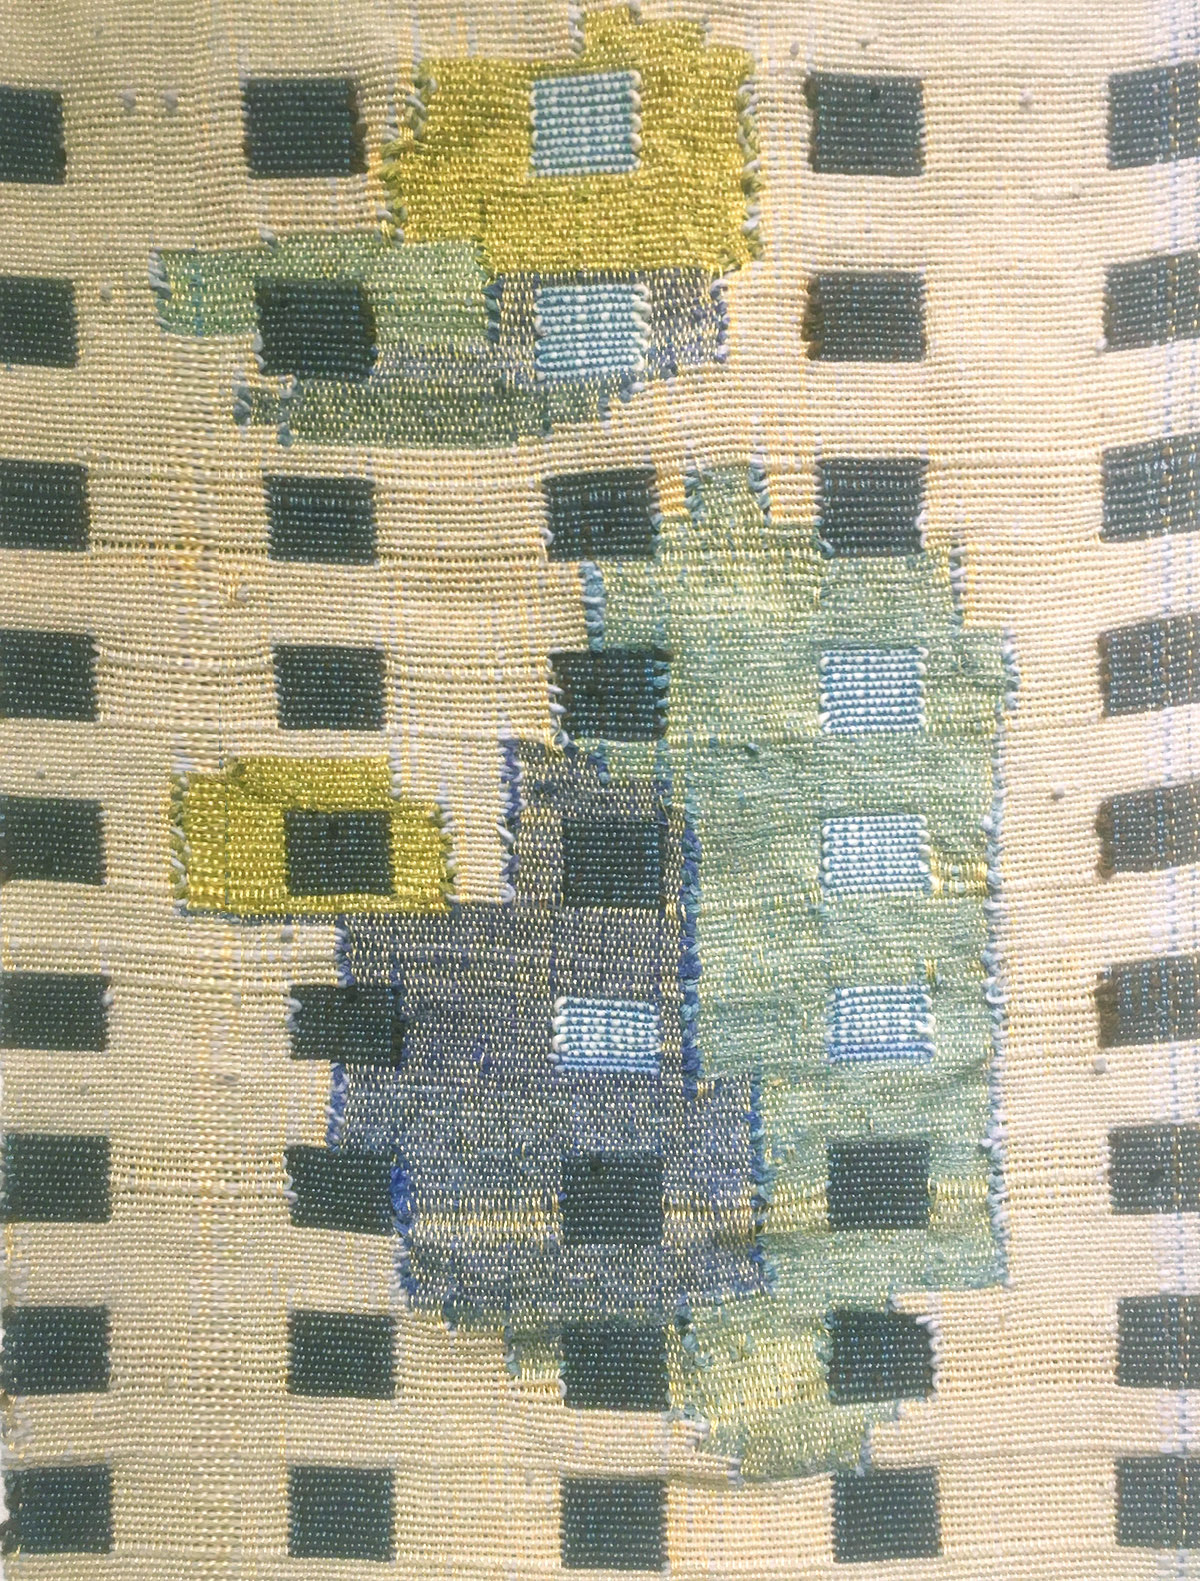 compostional weaving Woven tapestry